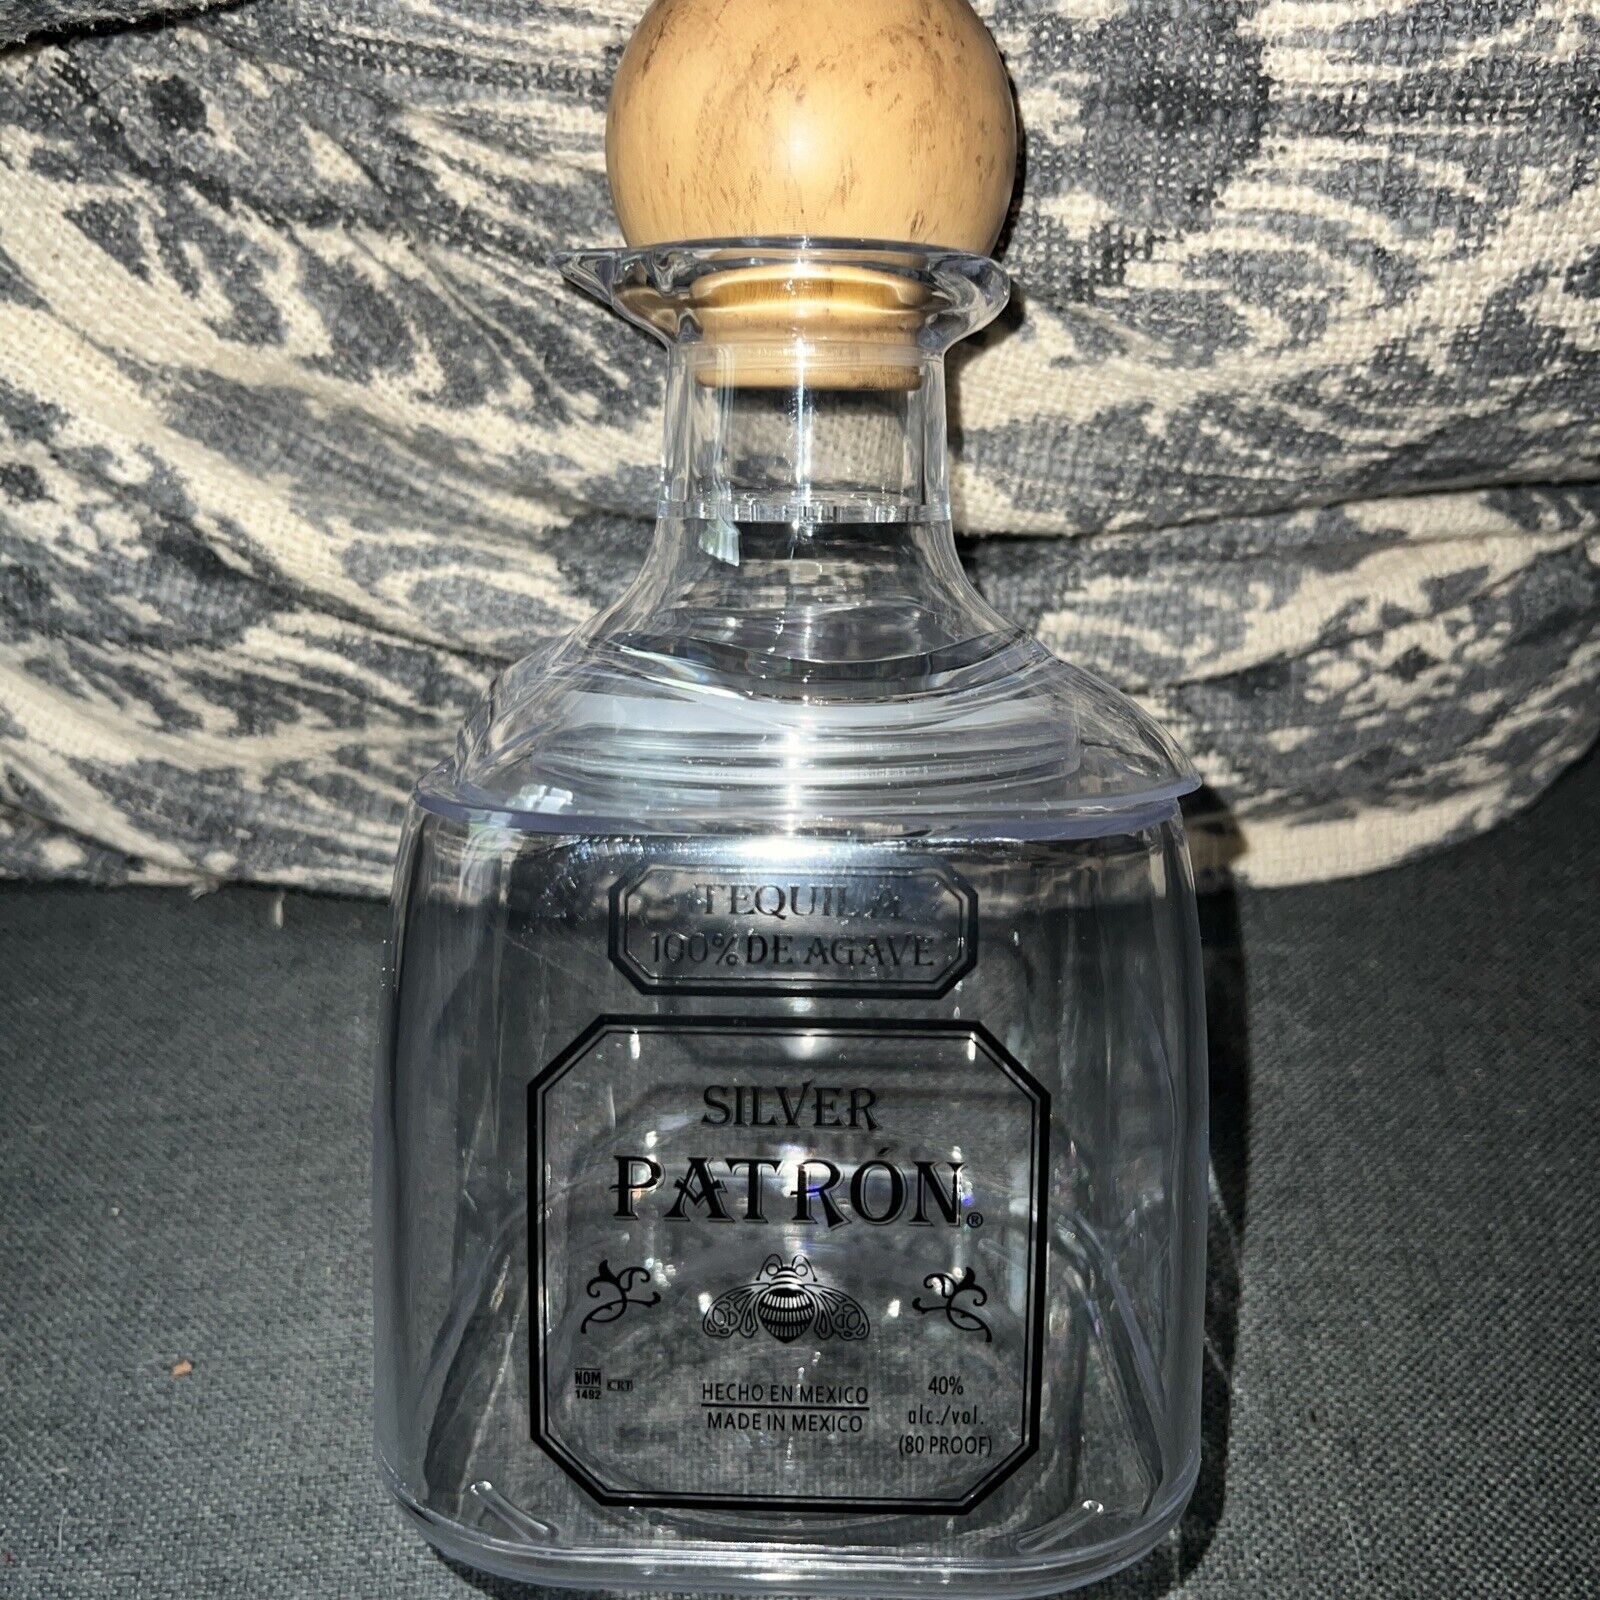 Large Patron Tequila Cocktail Shaker Set (32 Oz)  3 Piece Set. 9.5 Inch Tall New